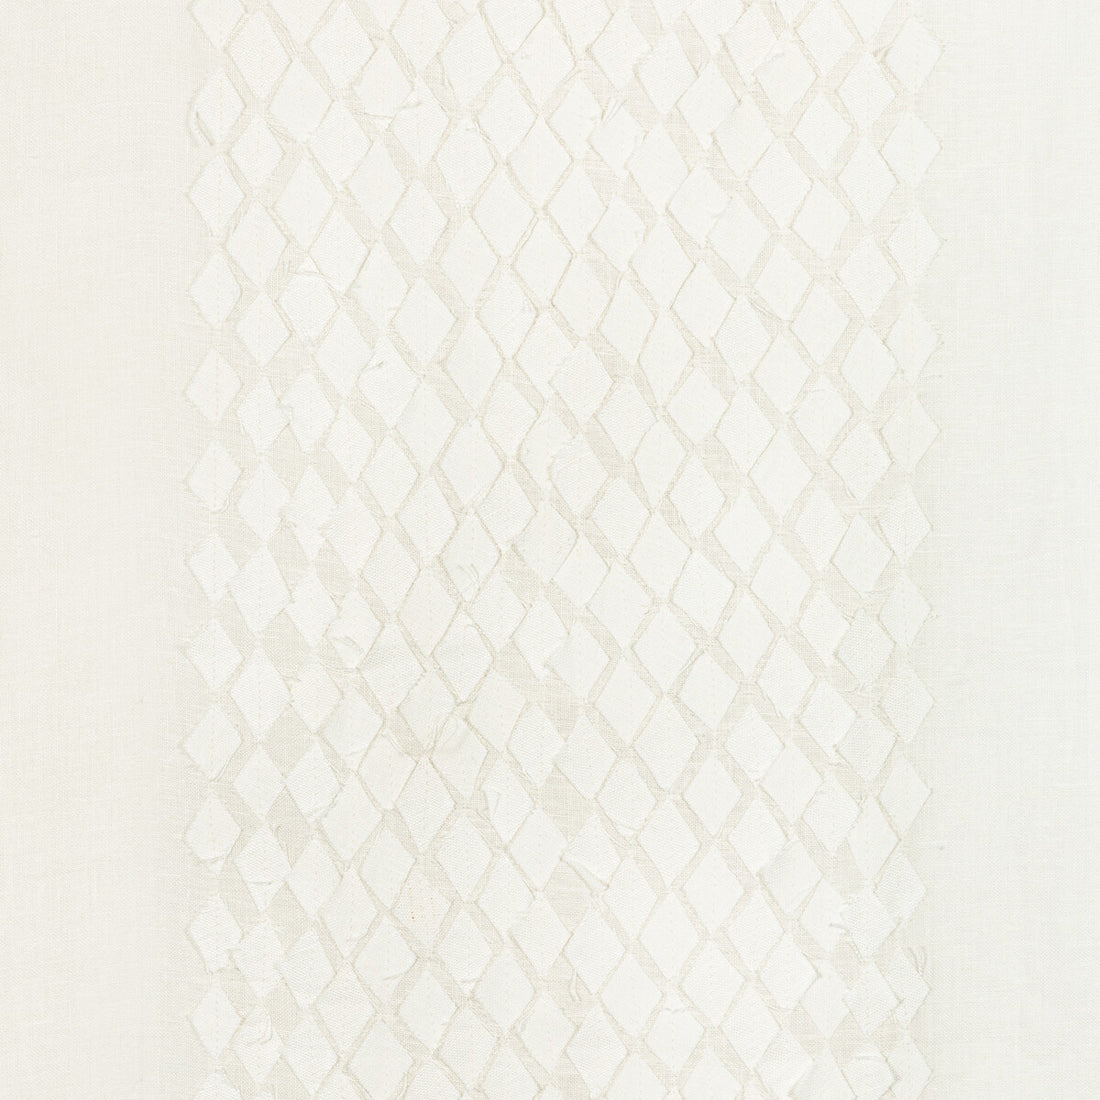 Linen Layer fabric in ivory color - pattern 4896.1.0 - by Kravet Couture in the Barbara Barry Ojai collection